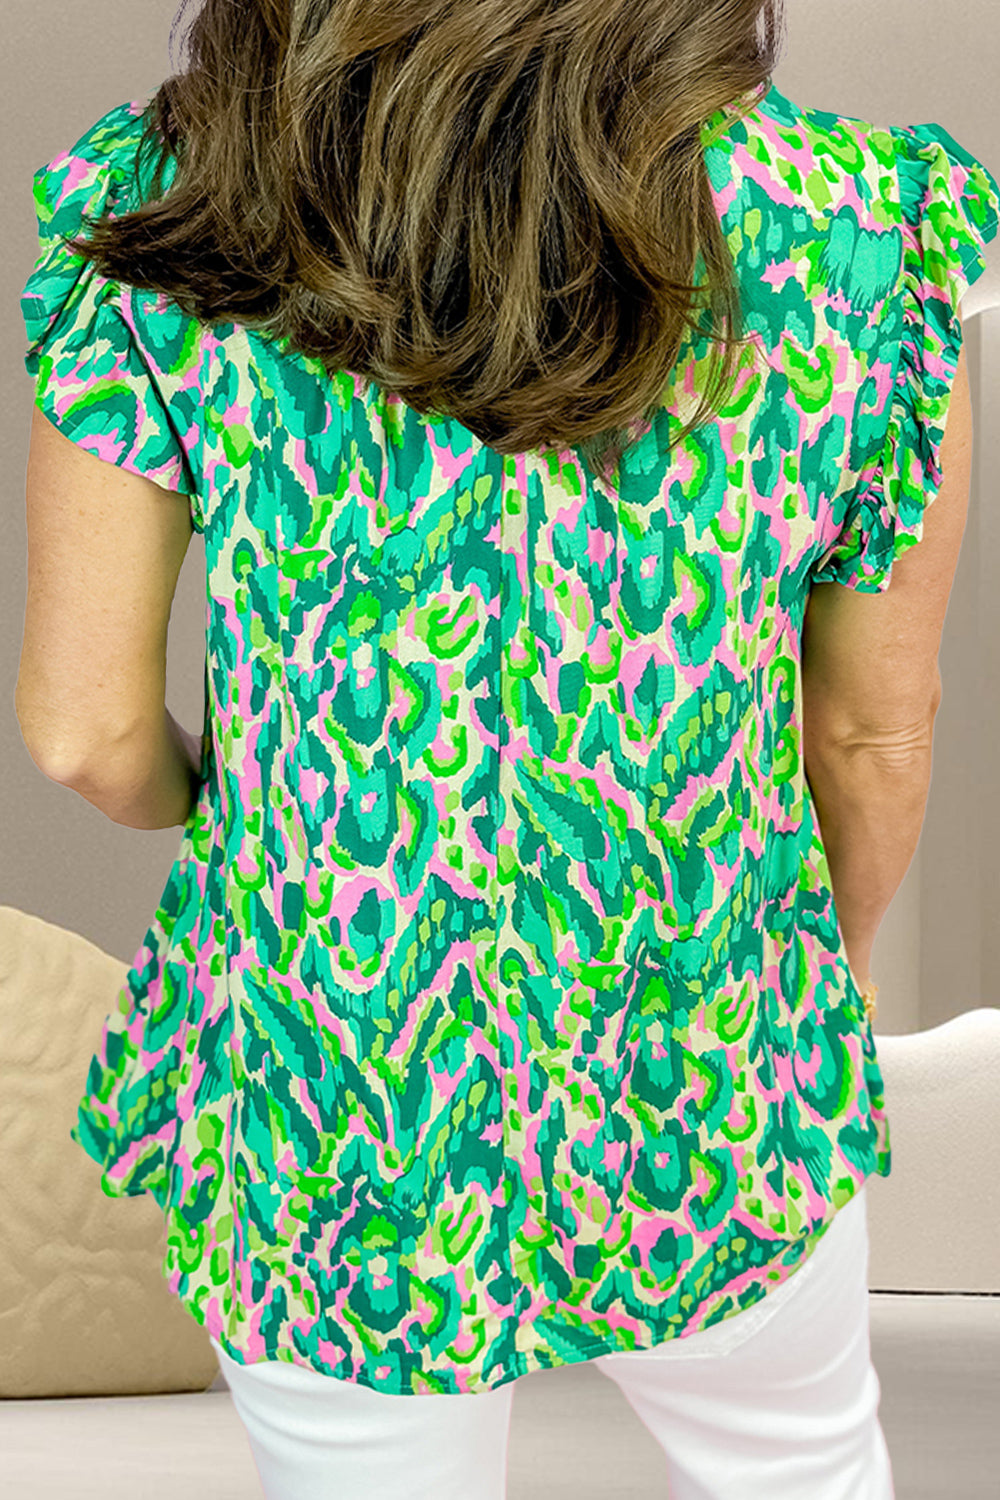 Bring Out Your Best Graphic Printed Tie Neck Blouse in Green or Strawberry